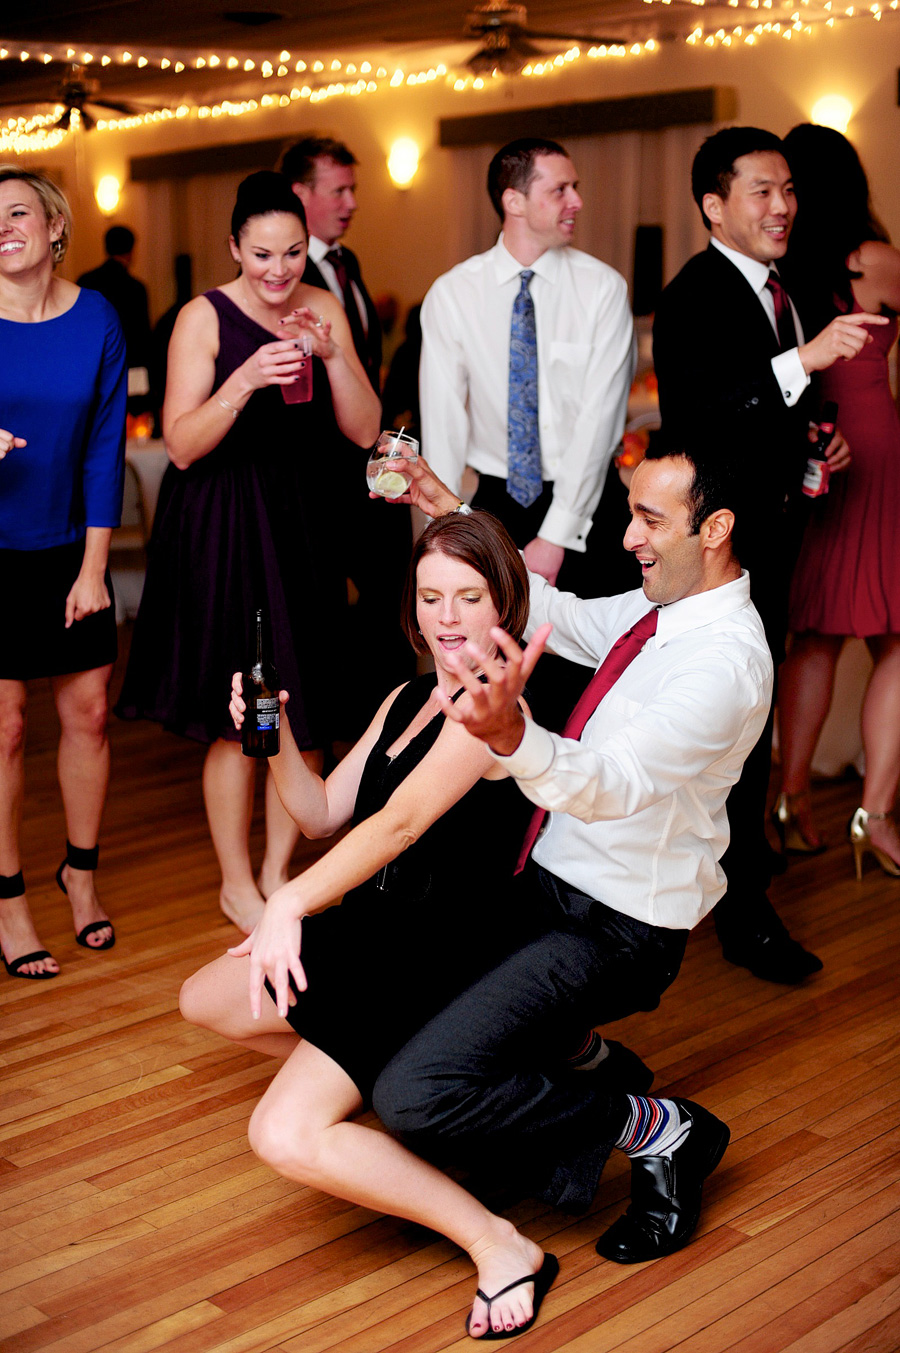 Just one of many amazing dance shots from Helen & Sean's wedding.